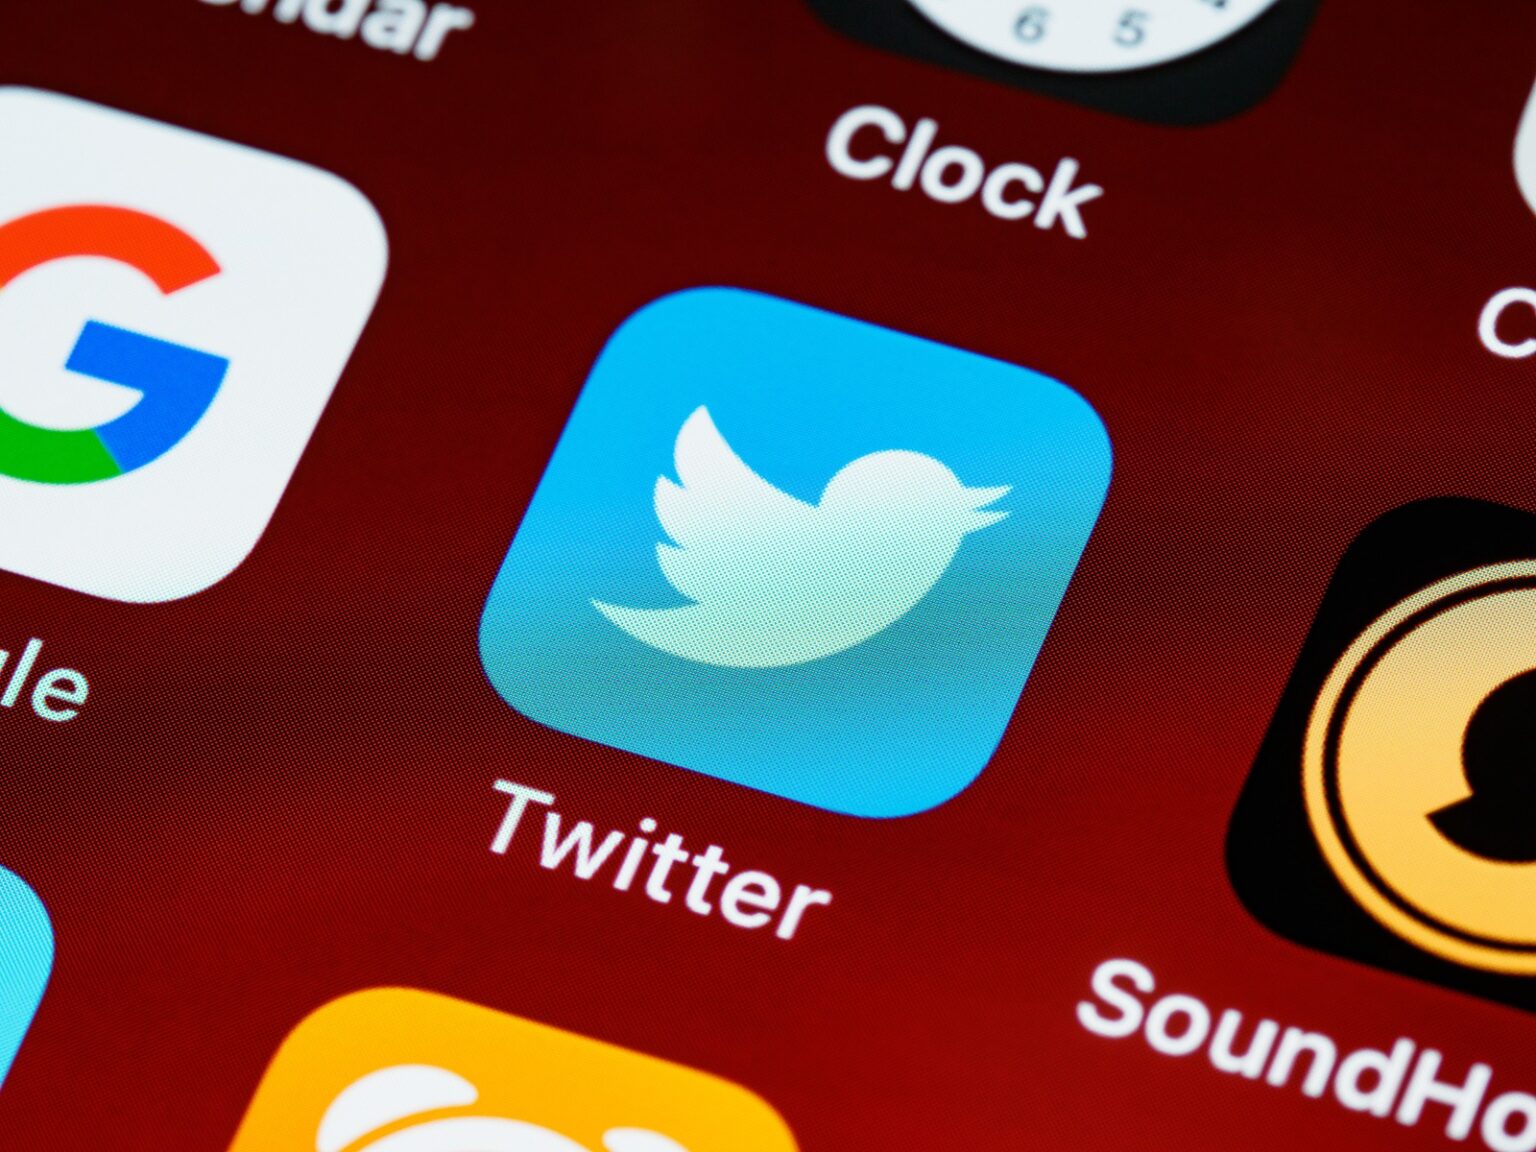 TWITTER ADDS PRODUCT DROPS FEATURE FOR BRANDS